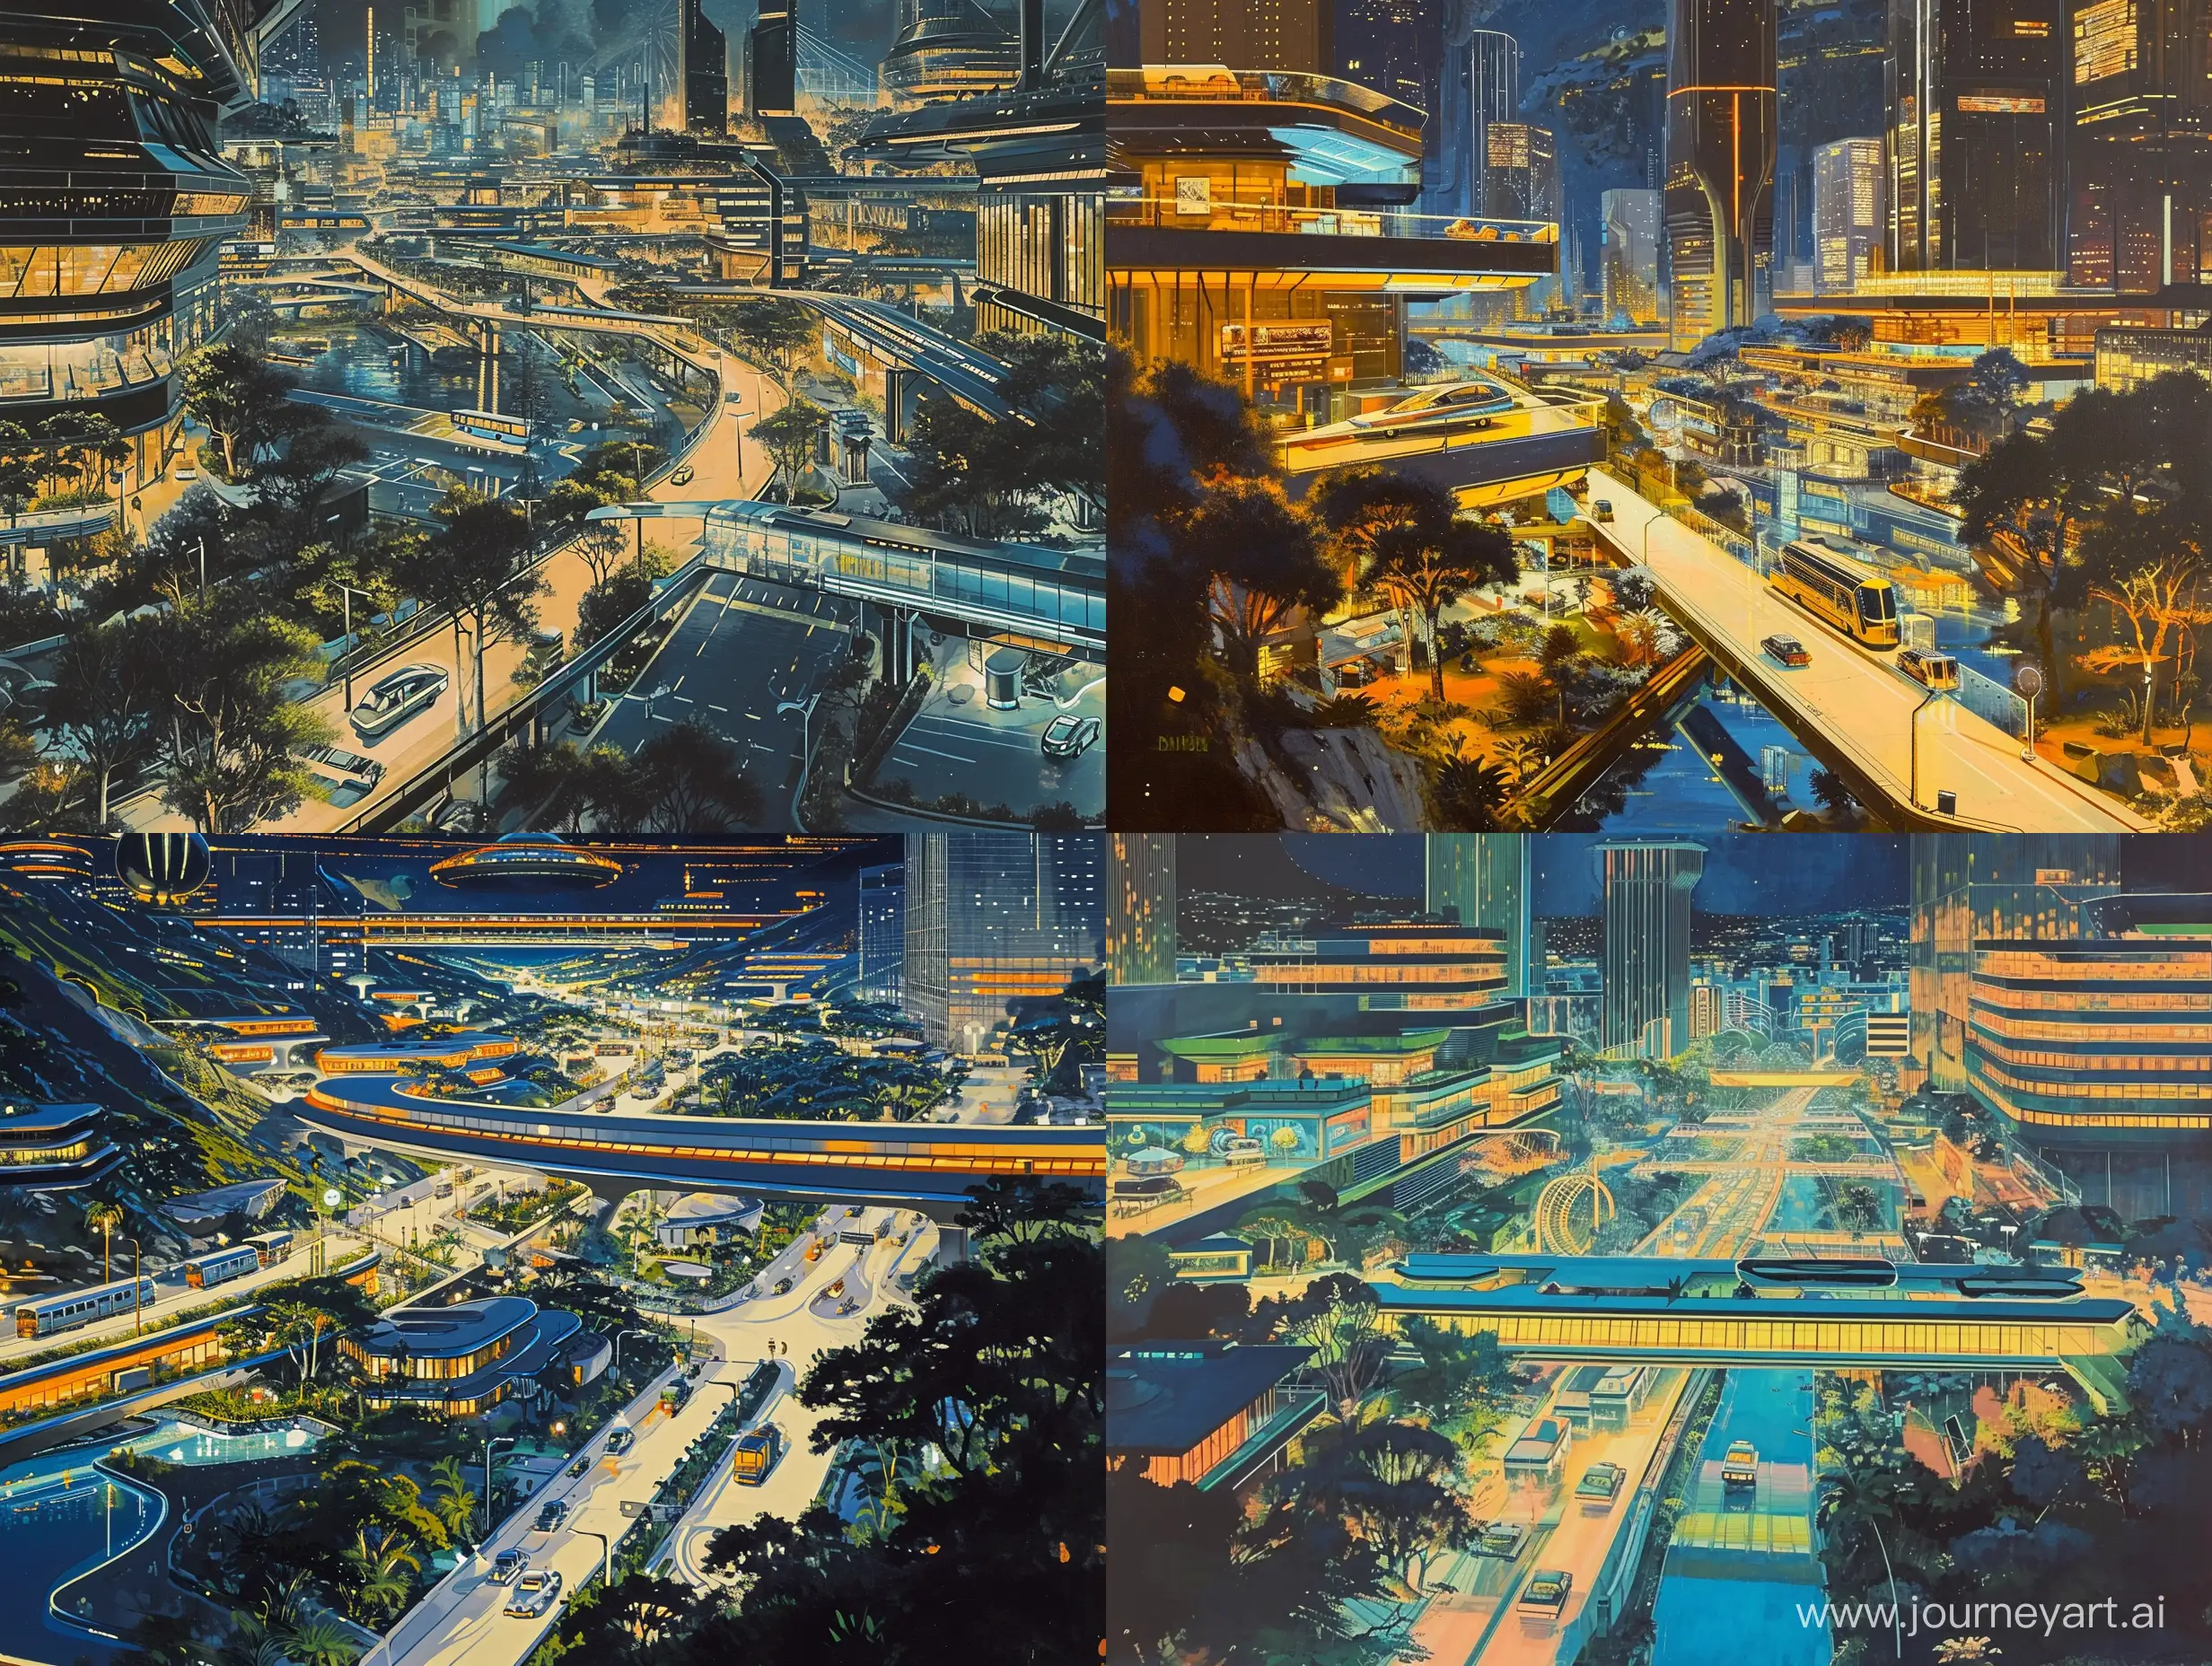 "Imagine an expansive airbrush painting that immerses the viewer in the heart of a bustling yet serene retro-futuristic cityscape at night. The setting is a harmonious blend of 1970s retro sci-fi charm and cutting-edge modern architecture. The city is alive with the glow of neon lights and the hum of advanced technology, yet there's a relaxing ambiance that permeates the urban environment. Streets are wide and open, flanked by buildings that showcase the sleek lines and optimistic design ethos of the '70s, now infused with the sophistication of modern sustainable technologies. Public transportation is a marvel of the era, with vehicles that echo the vintage aesthetics of science fiction yet operate with silent, eco-friendly efficiency. The naturalism of the city's ecosystem is evident in its integration of vibrant plant life and water features that coexist with the urban landscape. Every detail contributes to the sense of a living, breathing metropolis that honors its retro roots while embracing an eco-conscious future."




